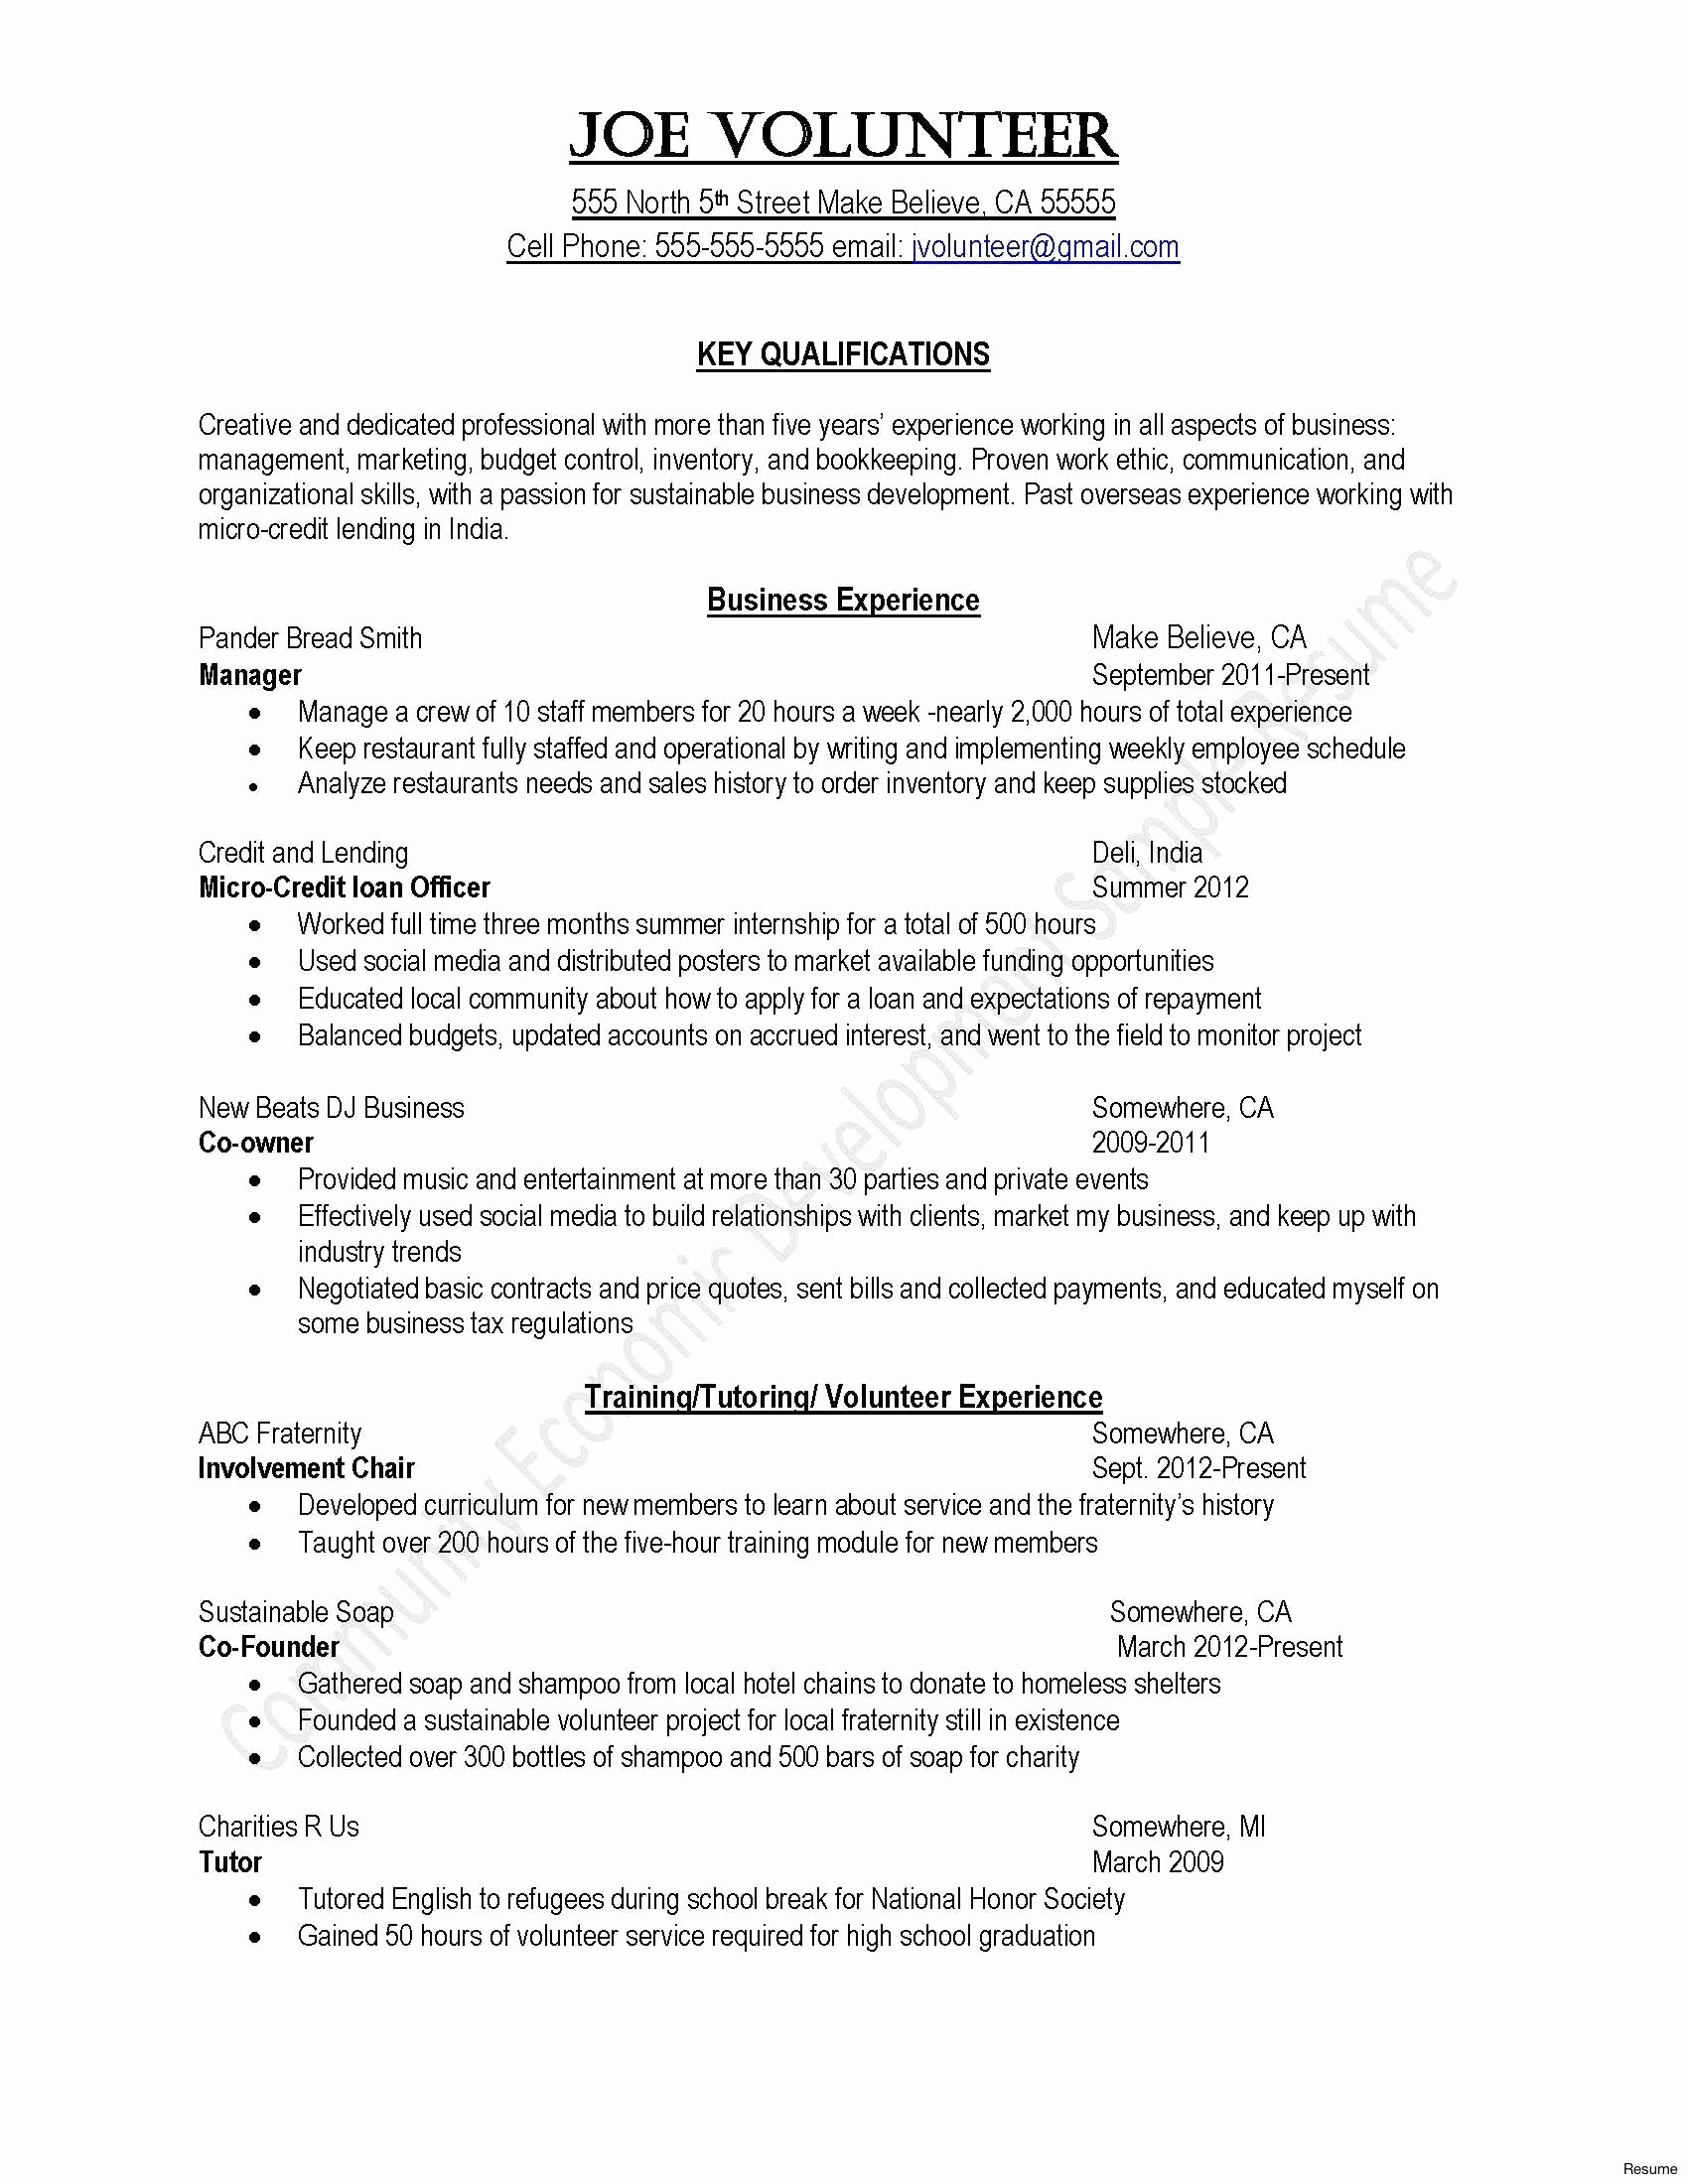 Traditional Cover Letter Template - Good Way to Start A Cover Letter